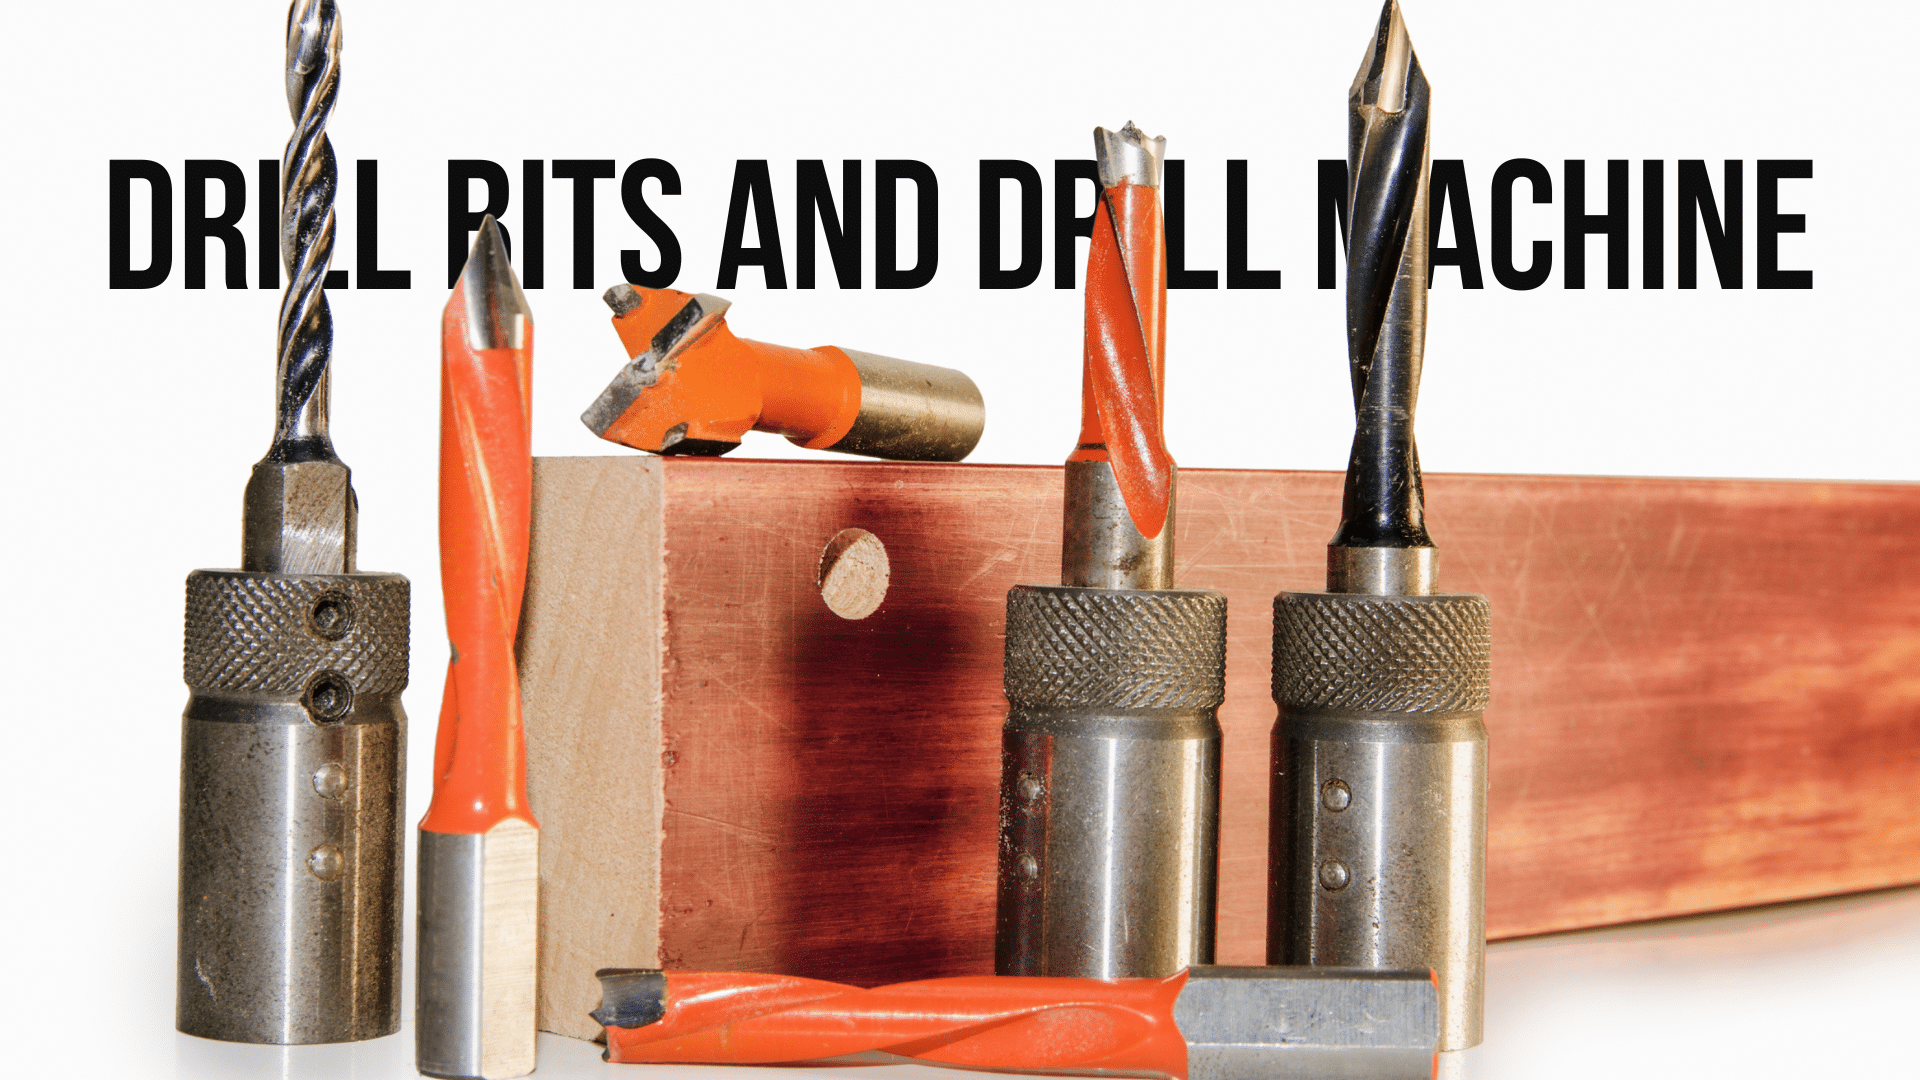 What is Drill Bits and Drill Machines